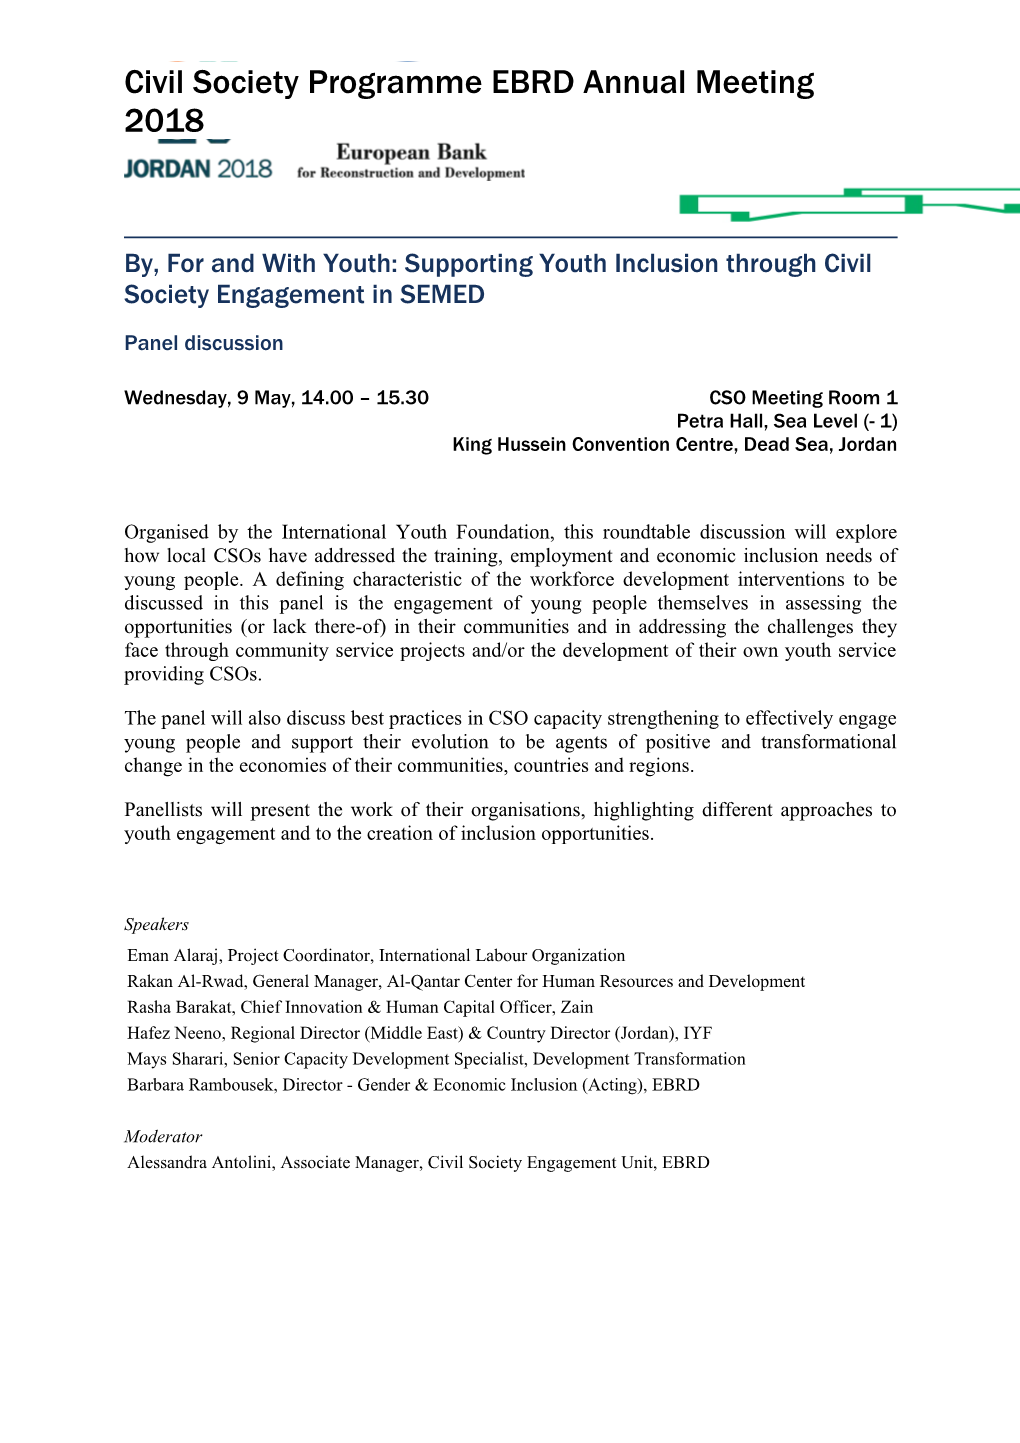 By, for and with Youth: Supporting Youth Inclusion Through Civil Society Engagement in SEMED